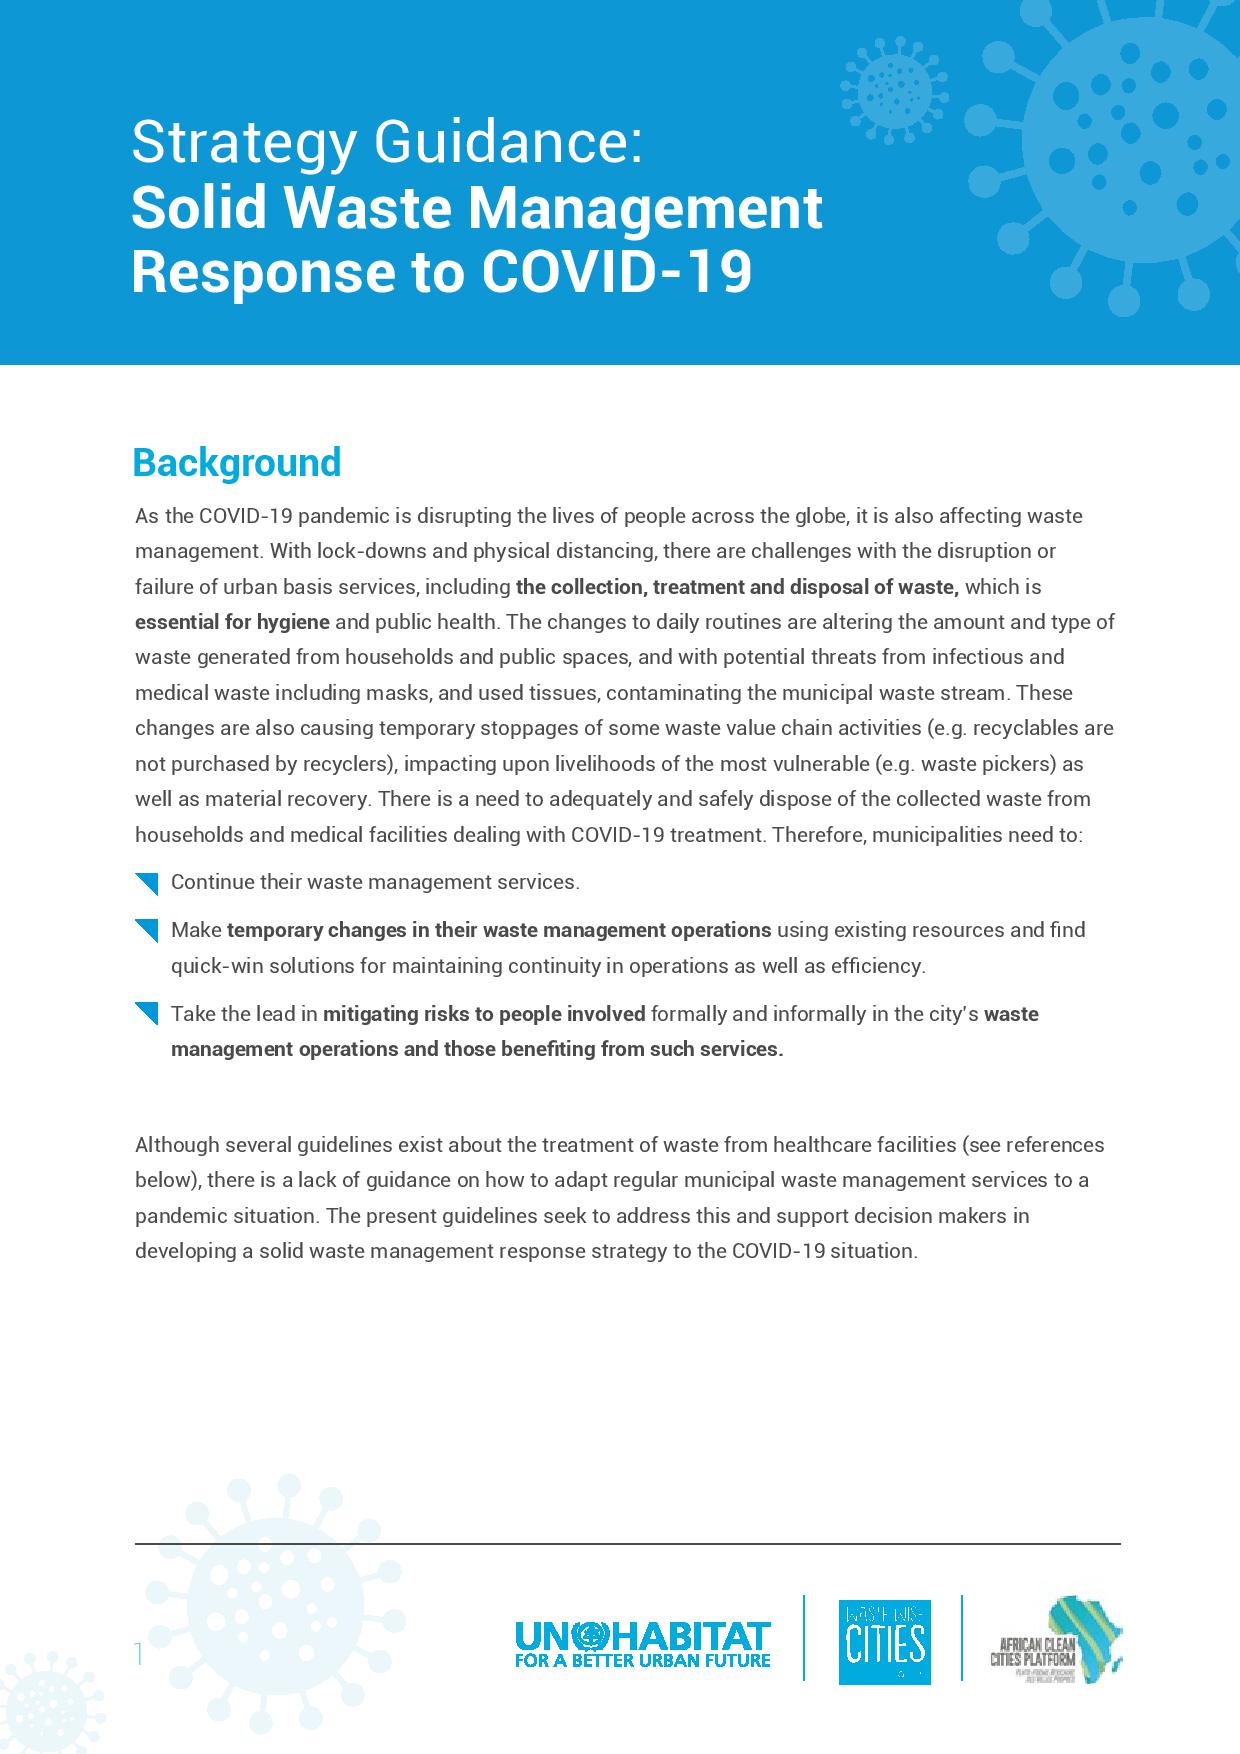 Strategy Guidance: Solid Waste Management Response to COVID-19